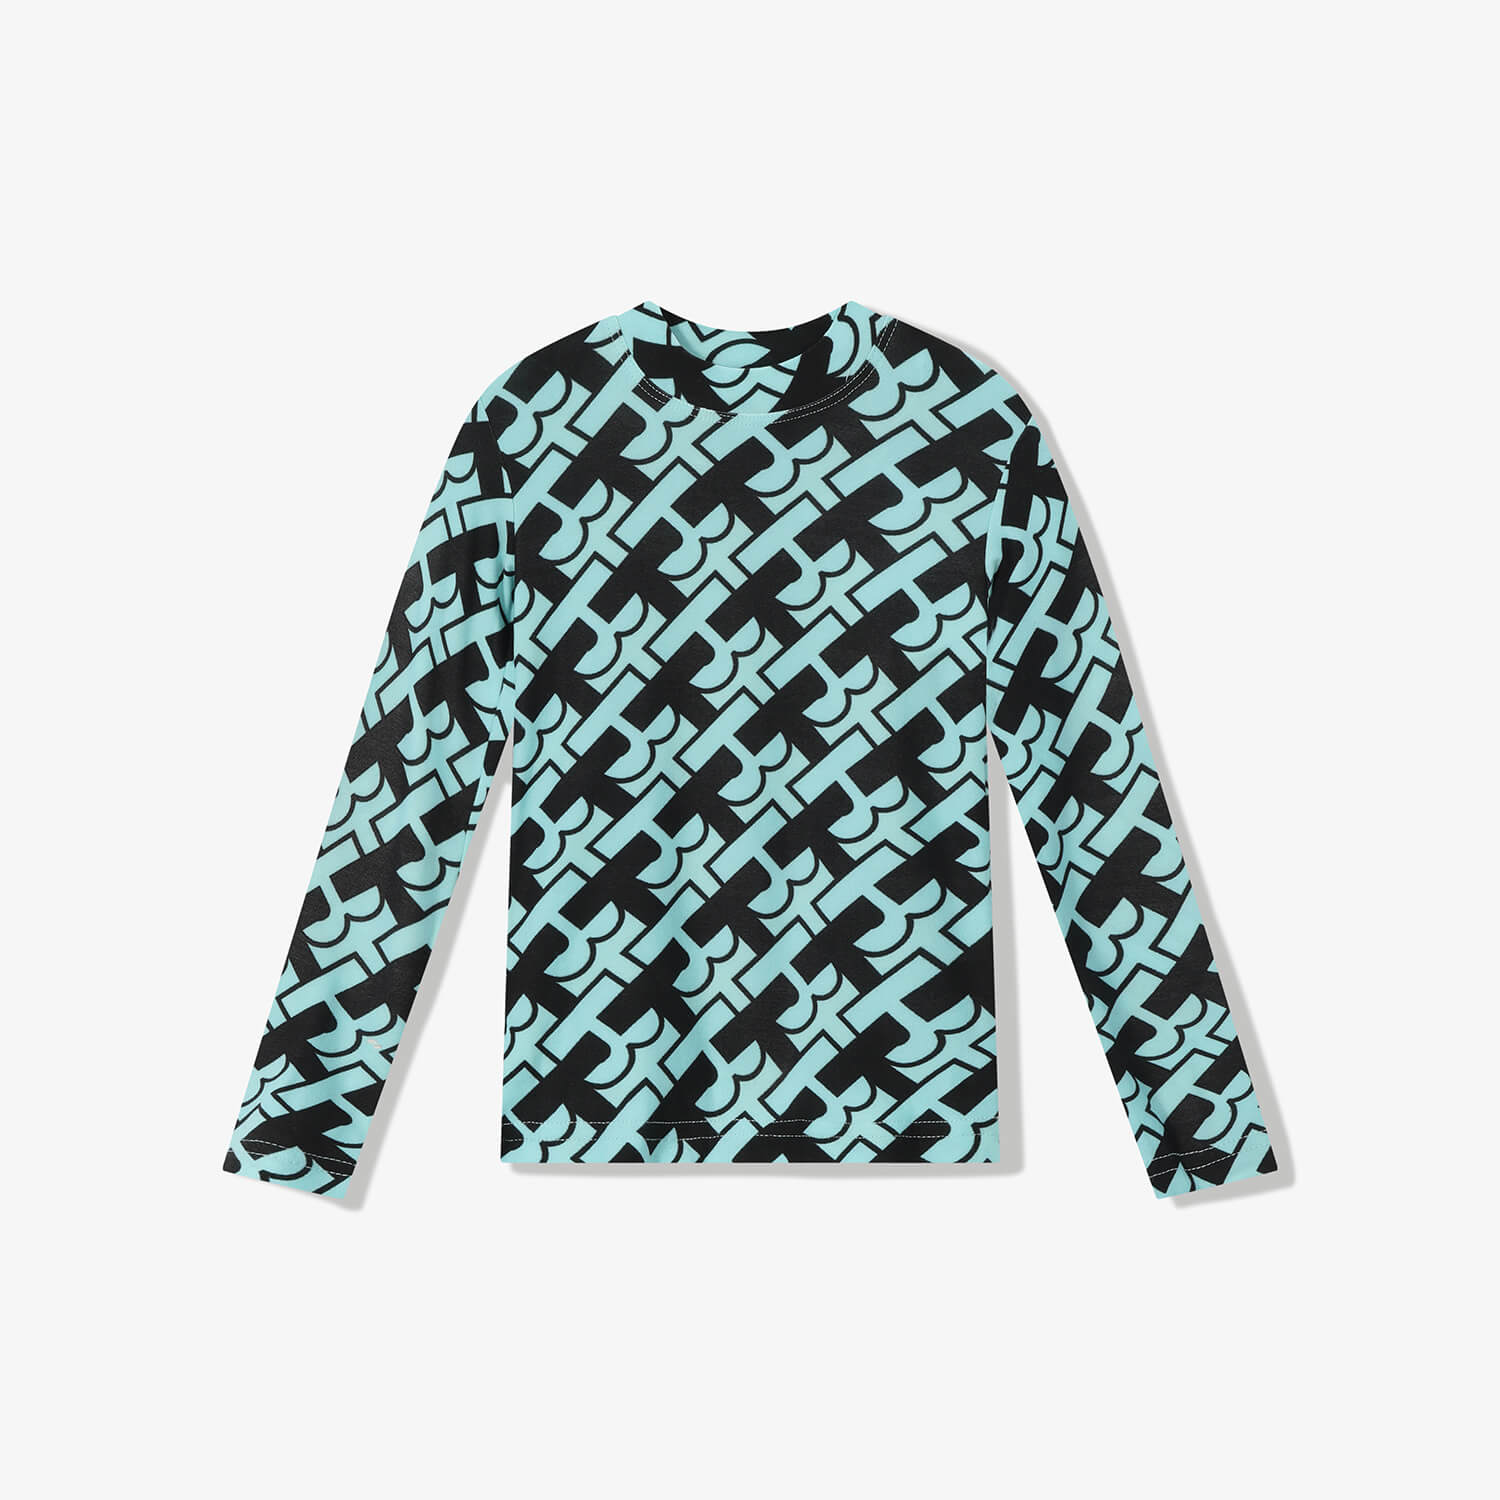 LIMITED EDITION MONOGRAM LONG SLEEVE TOP